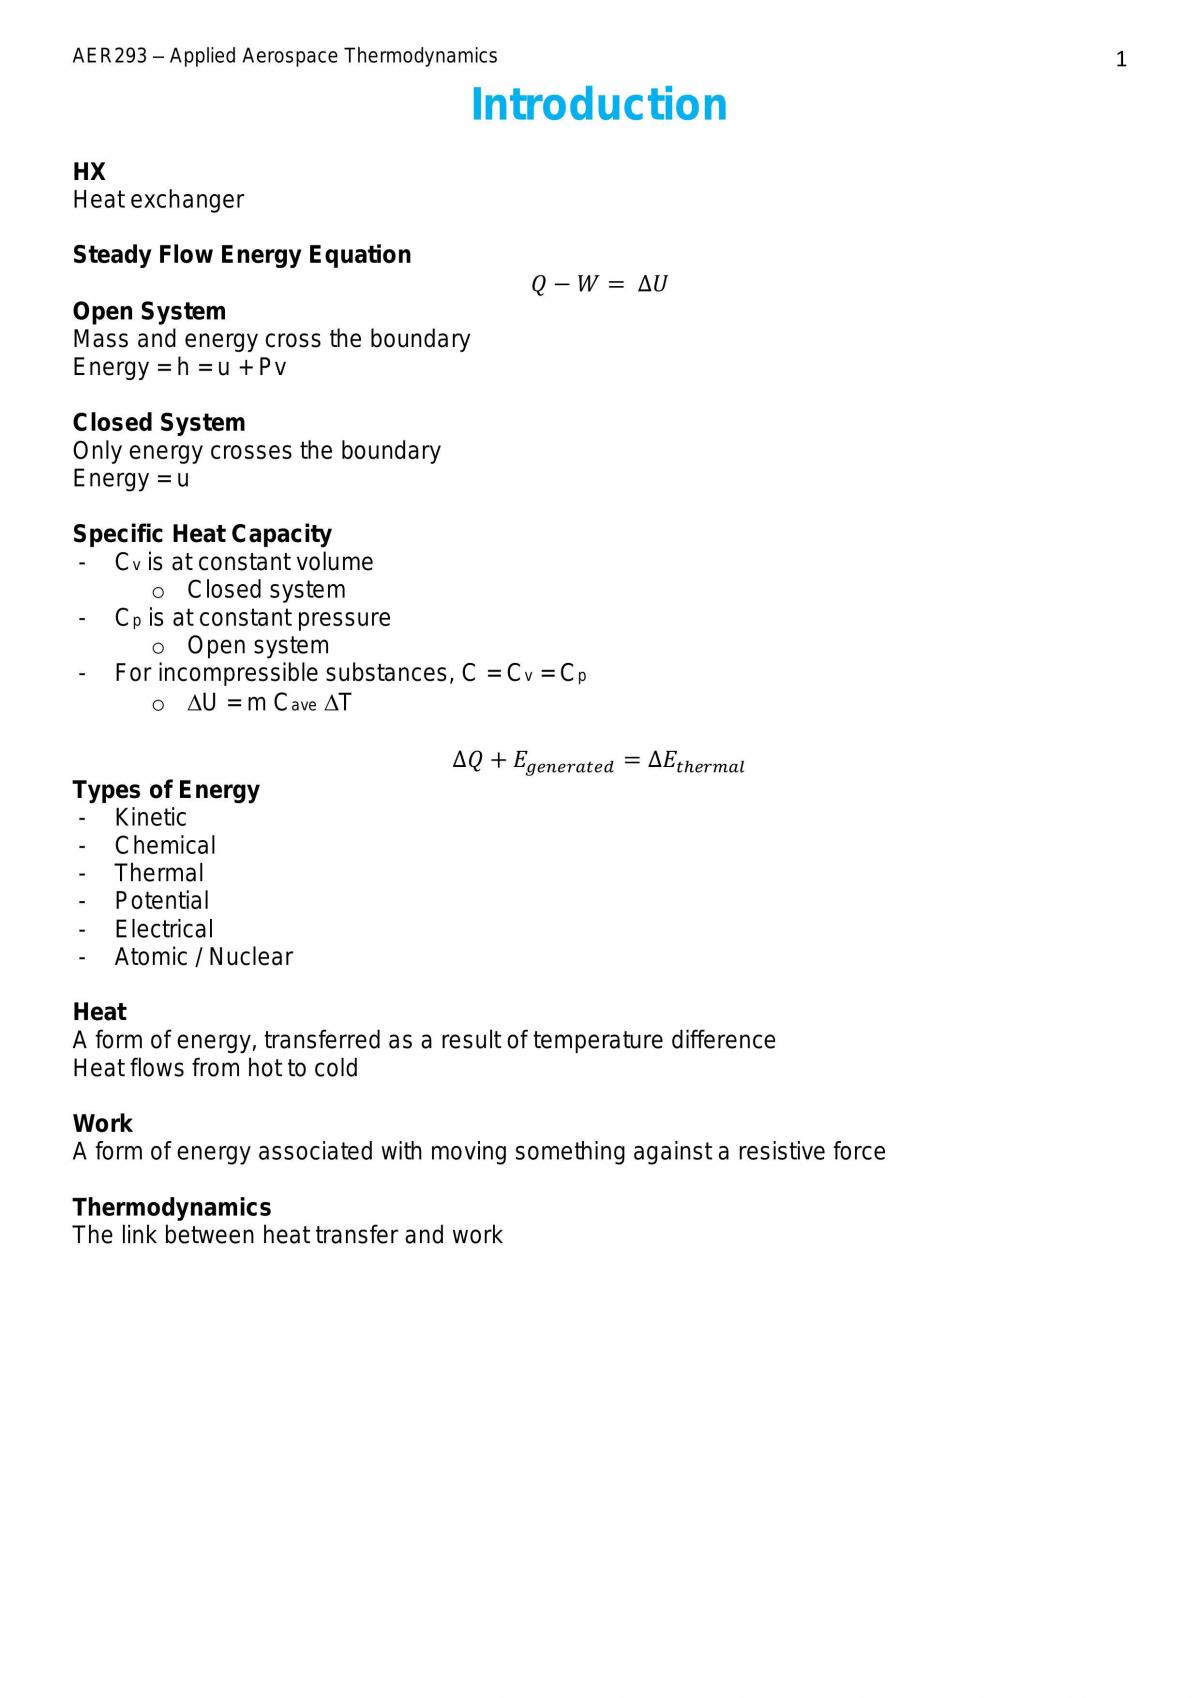 Applied Aerospace Thermodynamics Notes - Page 1